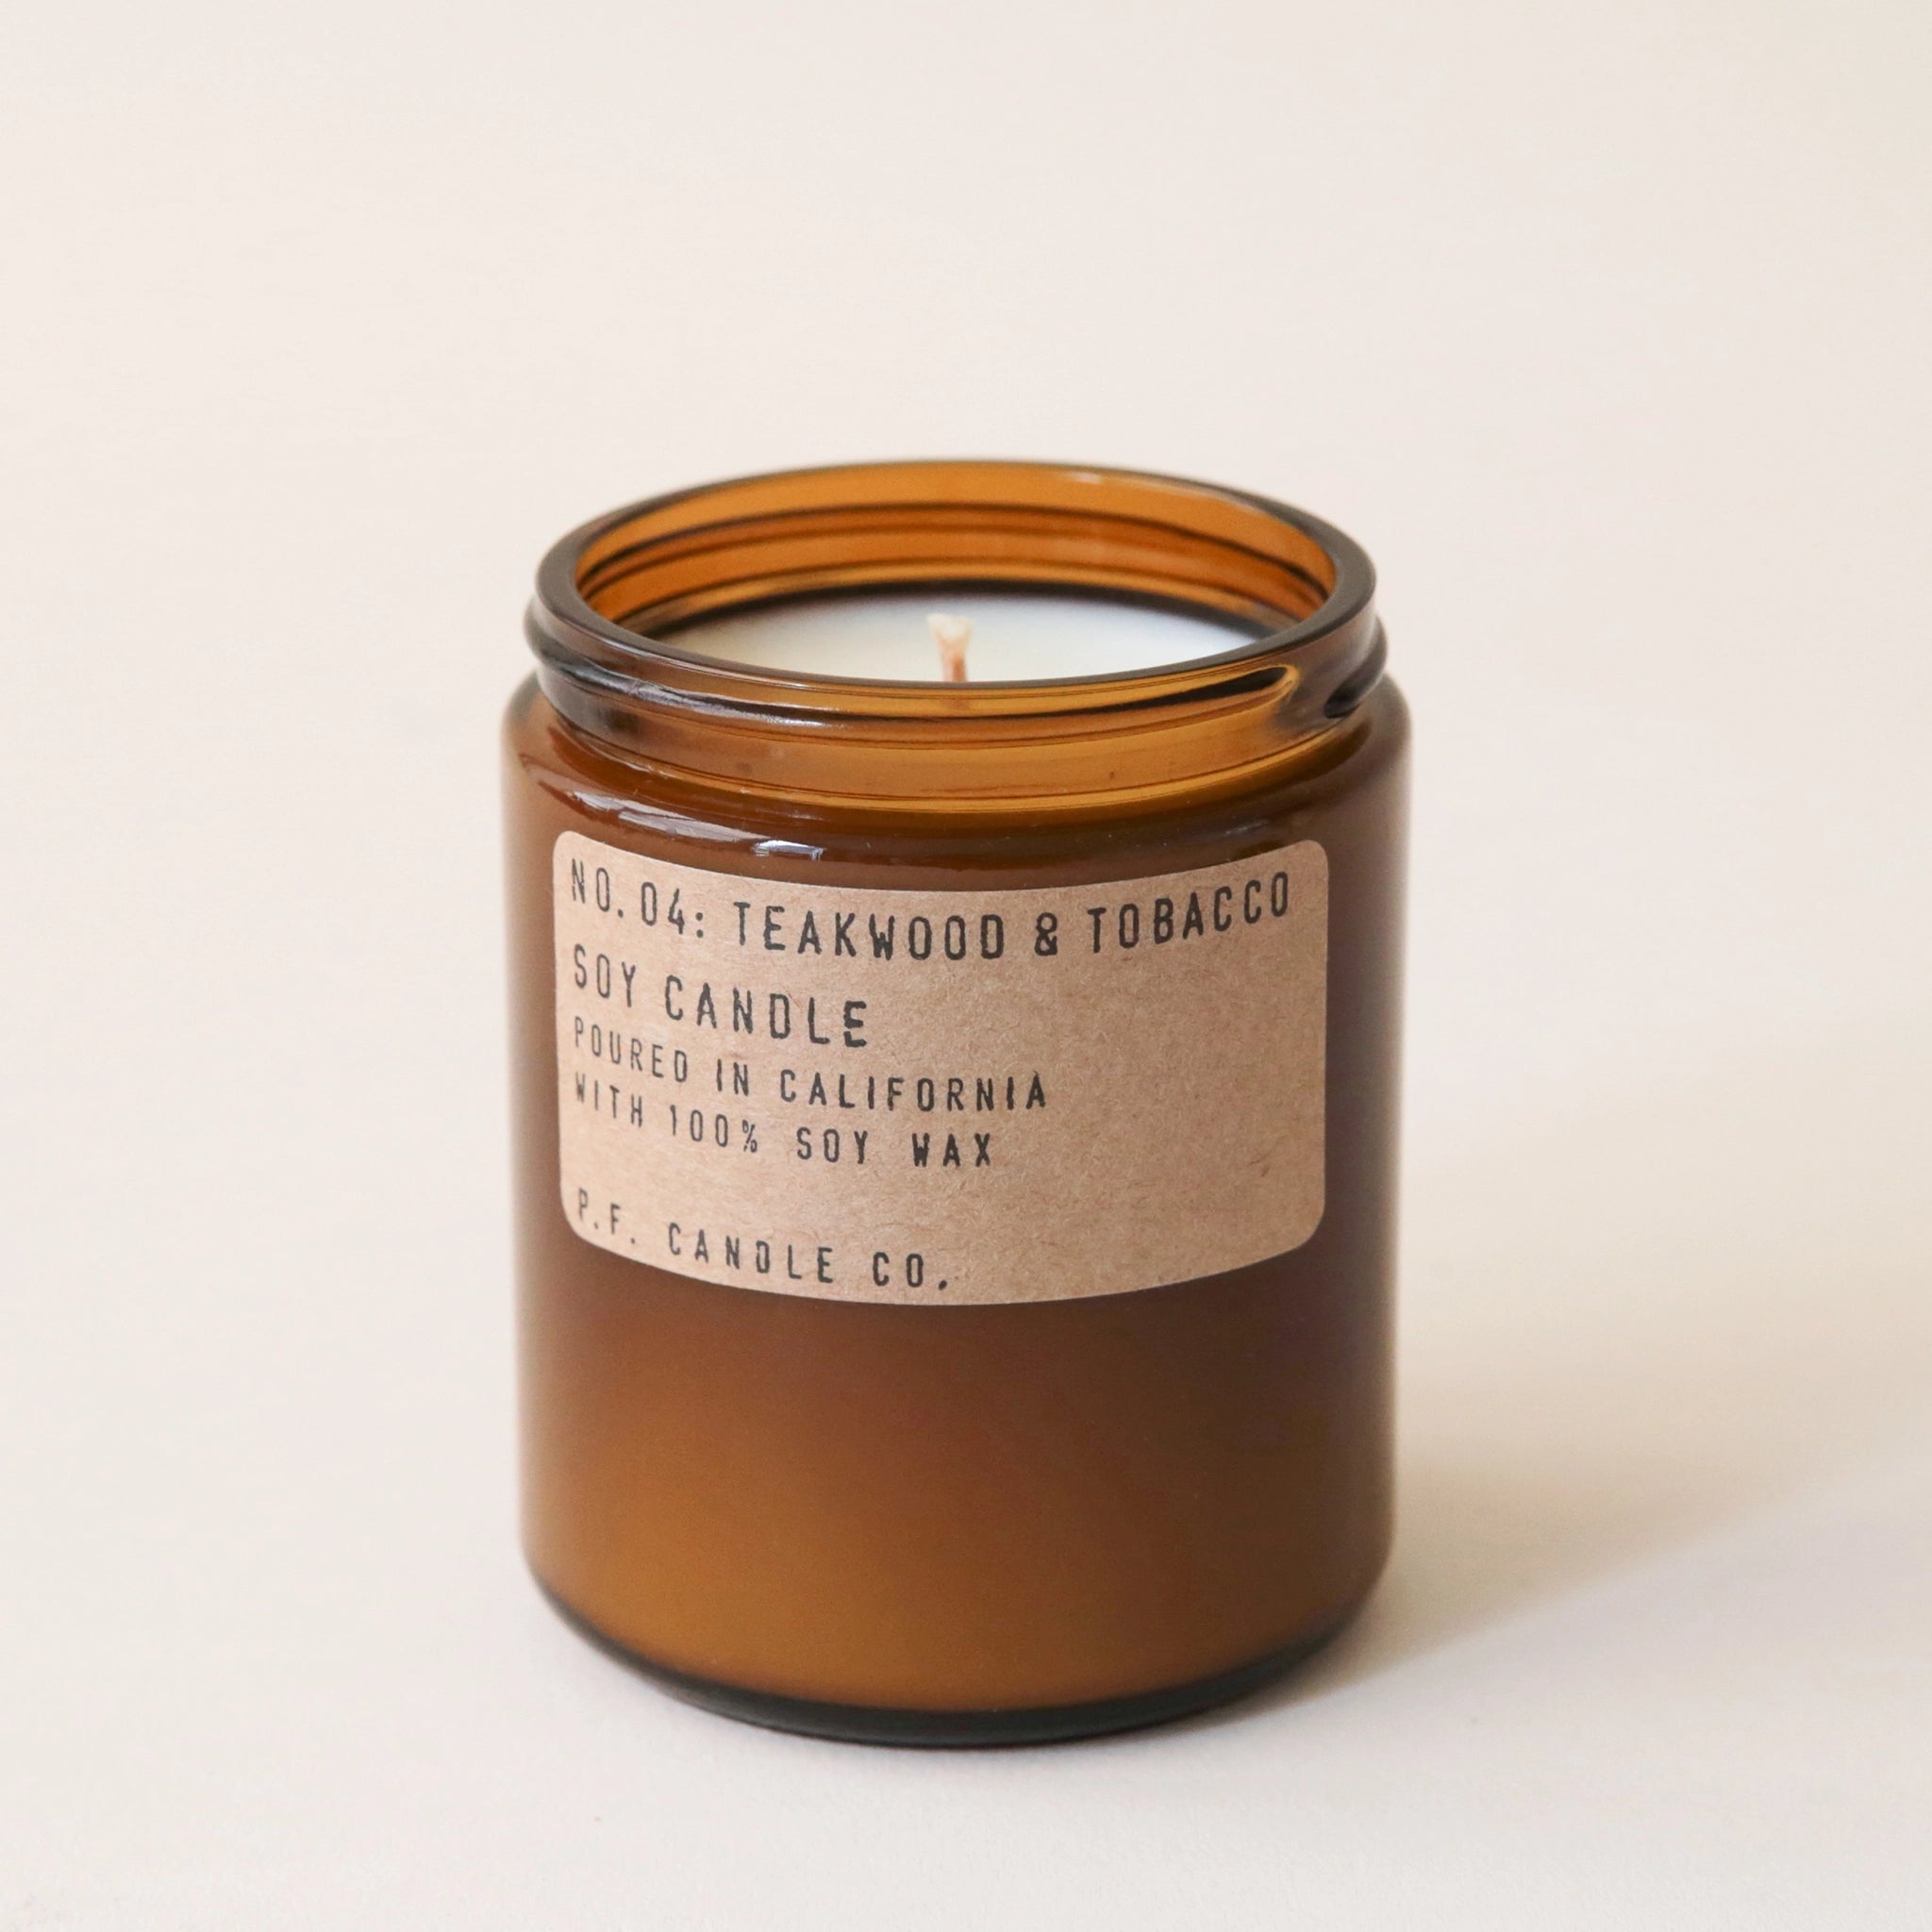 Against a white background is a dark amber, round jar. On the front of the jar is a brown, rounded, rectangular sticker with black text. The text reads ‘no.04 teakwood &amp; tobacco. Soy candle. Handmade in California with 100% soy way. P.F. candle co.’